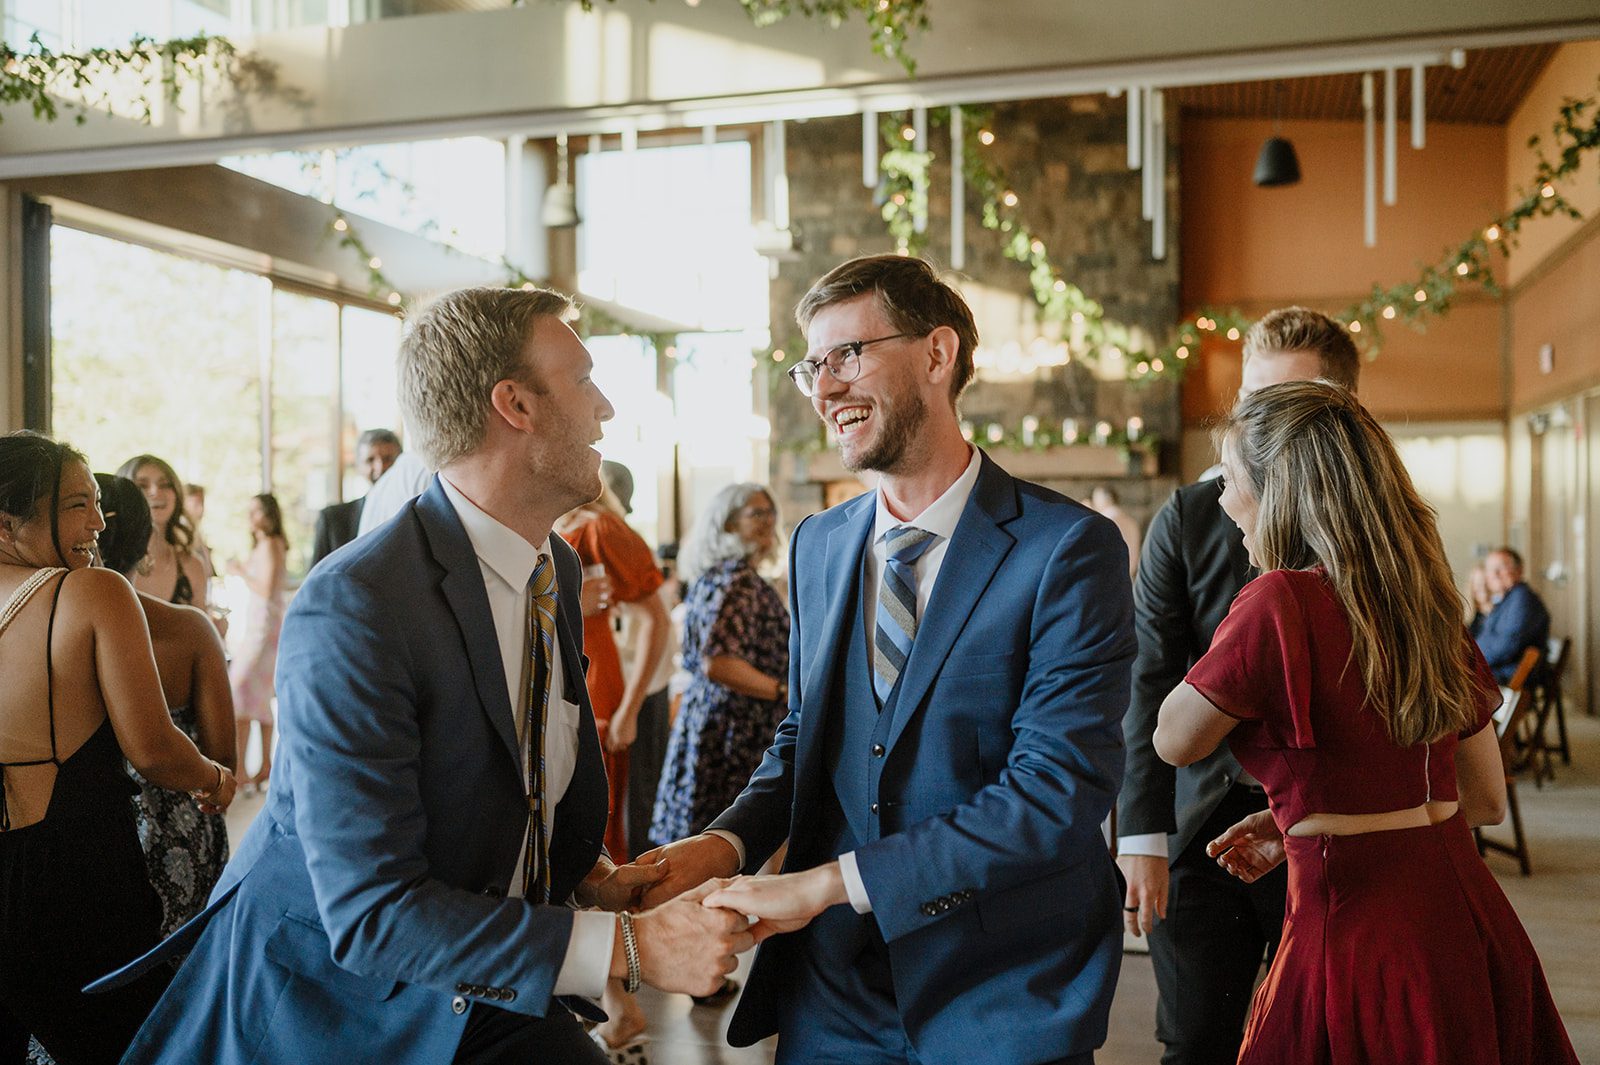 Two guests sharing a light-hearted, joyous dance at a wedding reception, surrounded by smiling friends and family, in a moment of pure celebration captured by Lindsey Paradiso Photography.